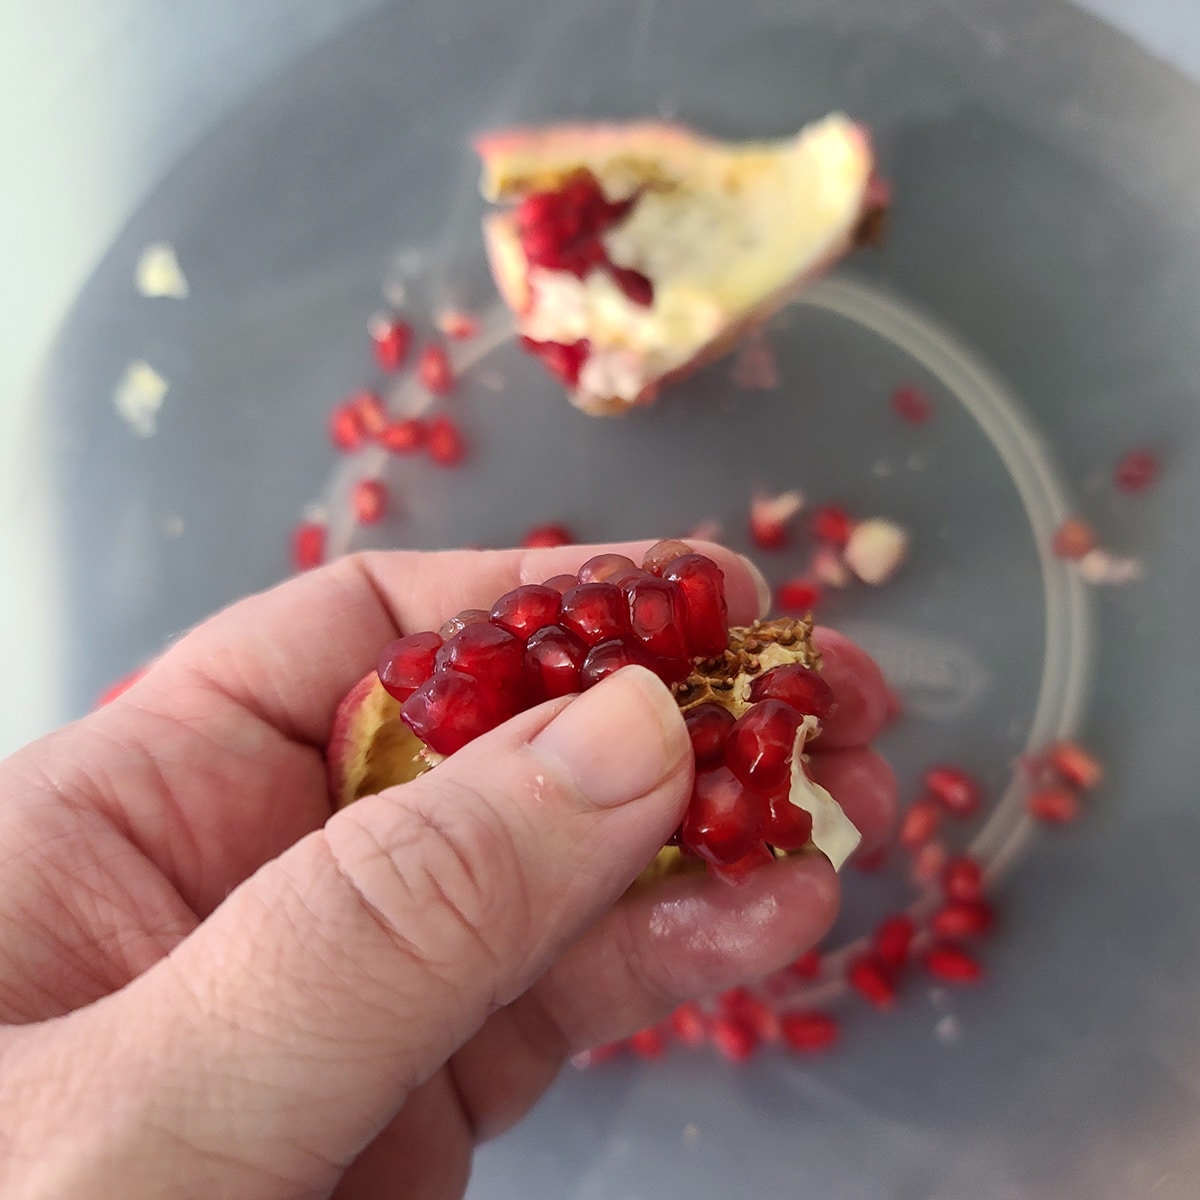 A thumb dislodging pomegranate arils from a chunk of pomegranate.